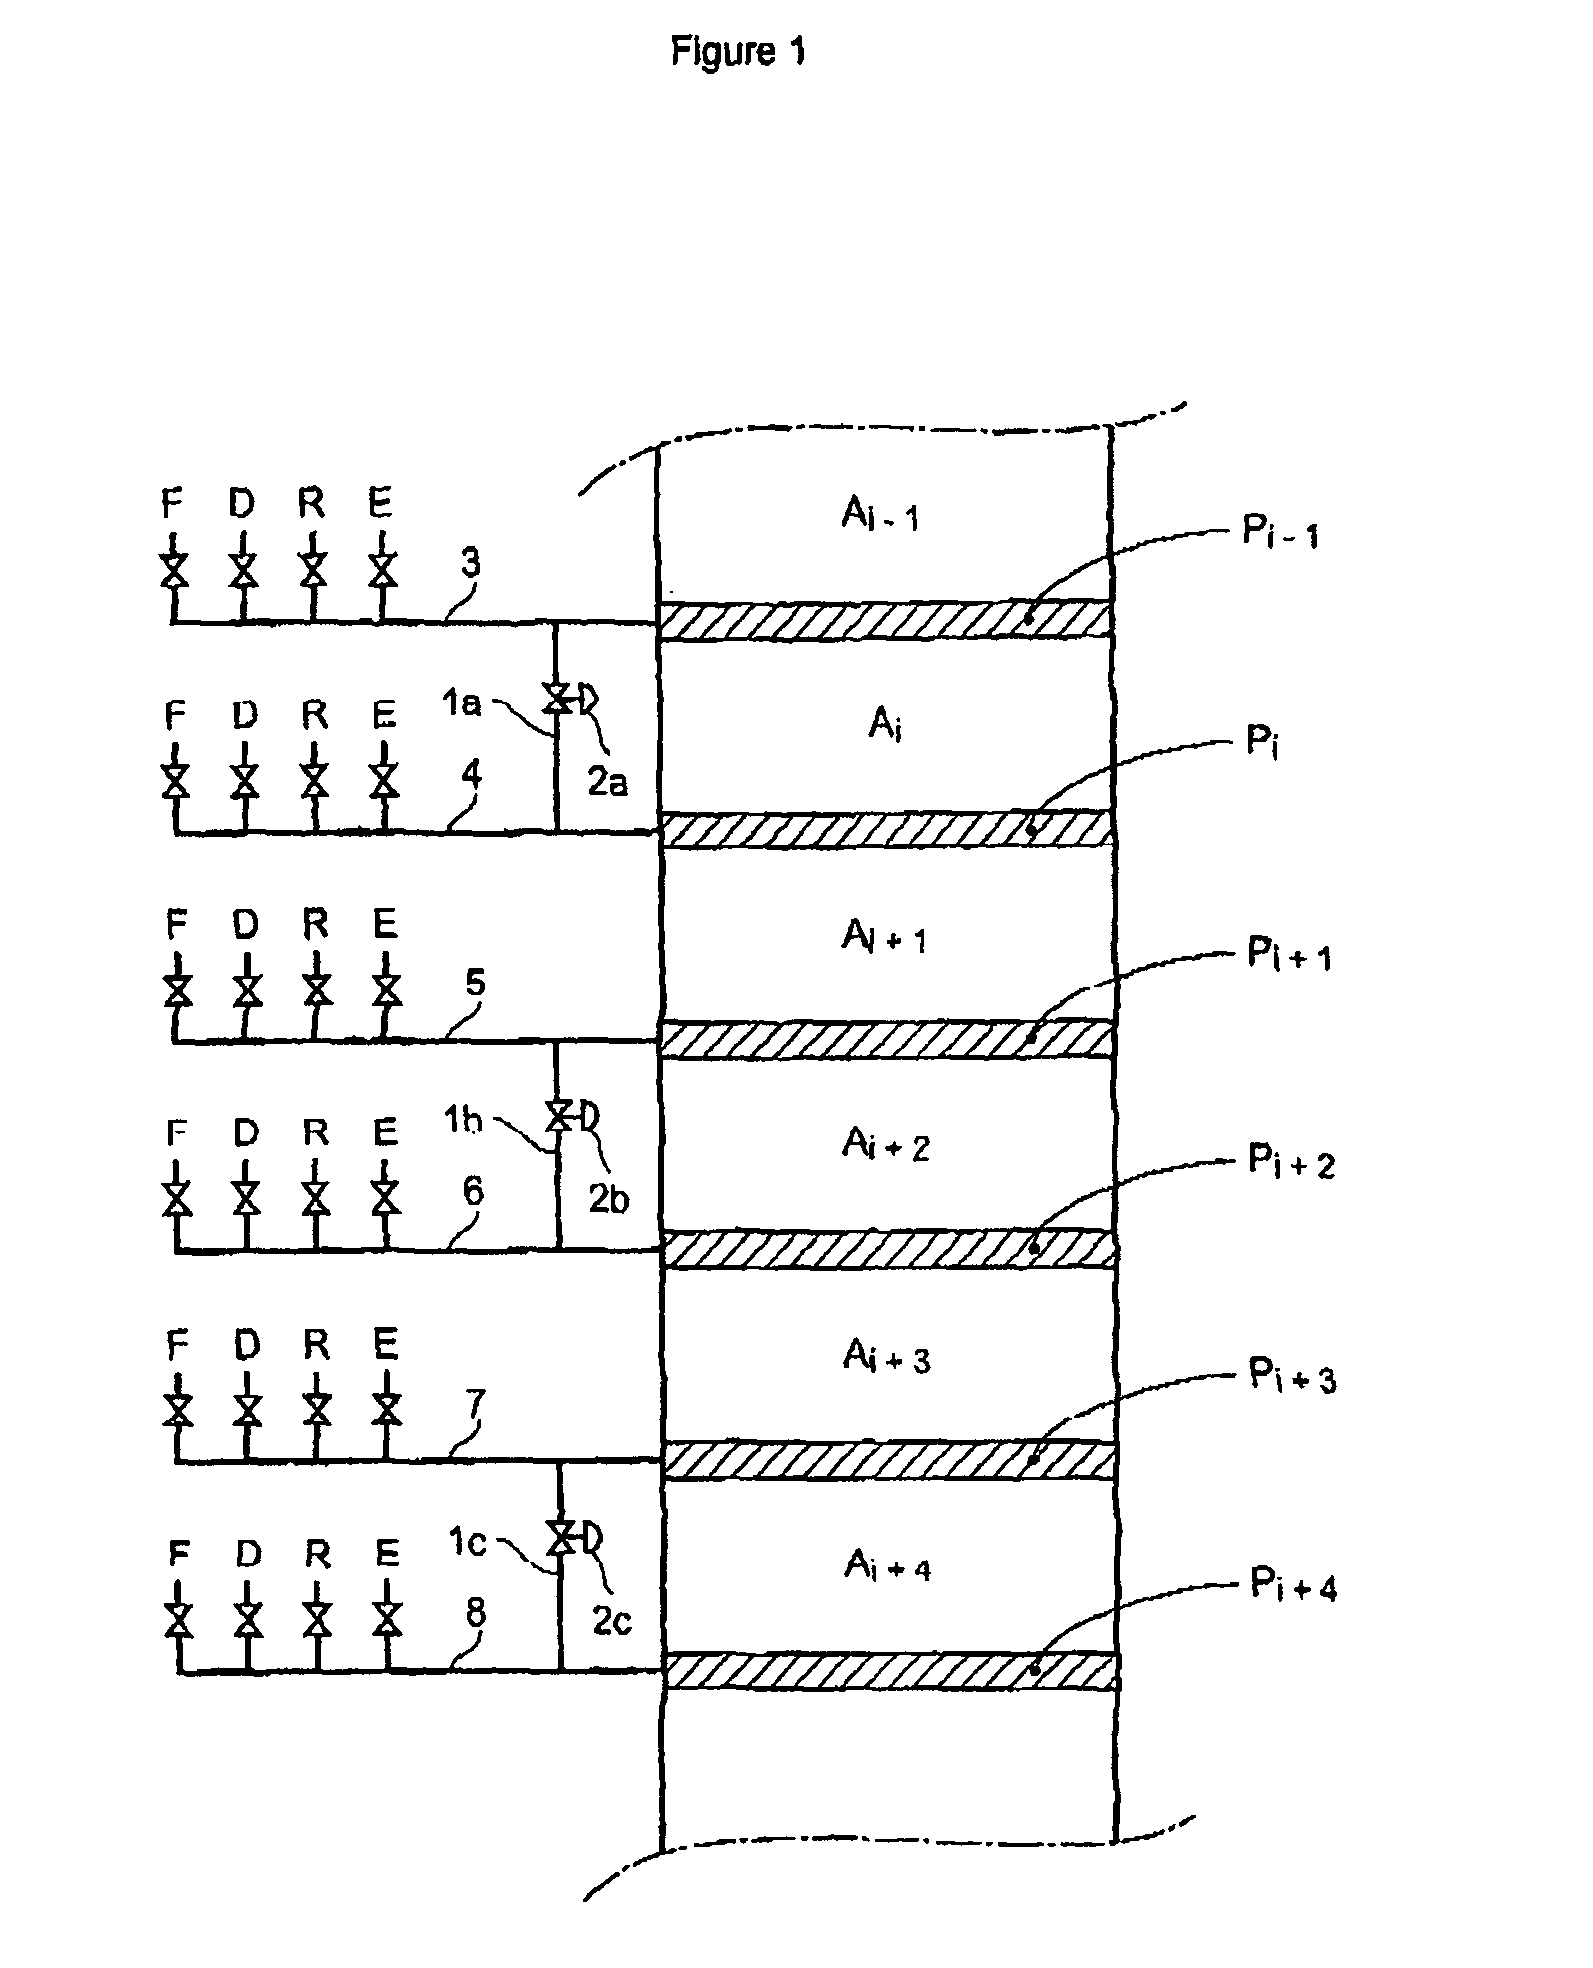 Process and device for simulated moving bed separation with a reduced number of valves and lines